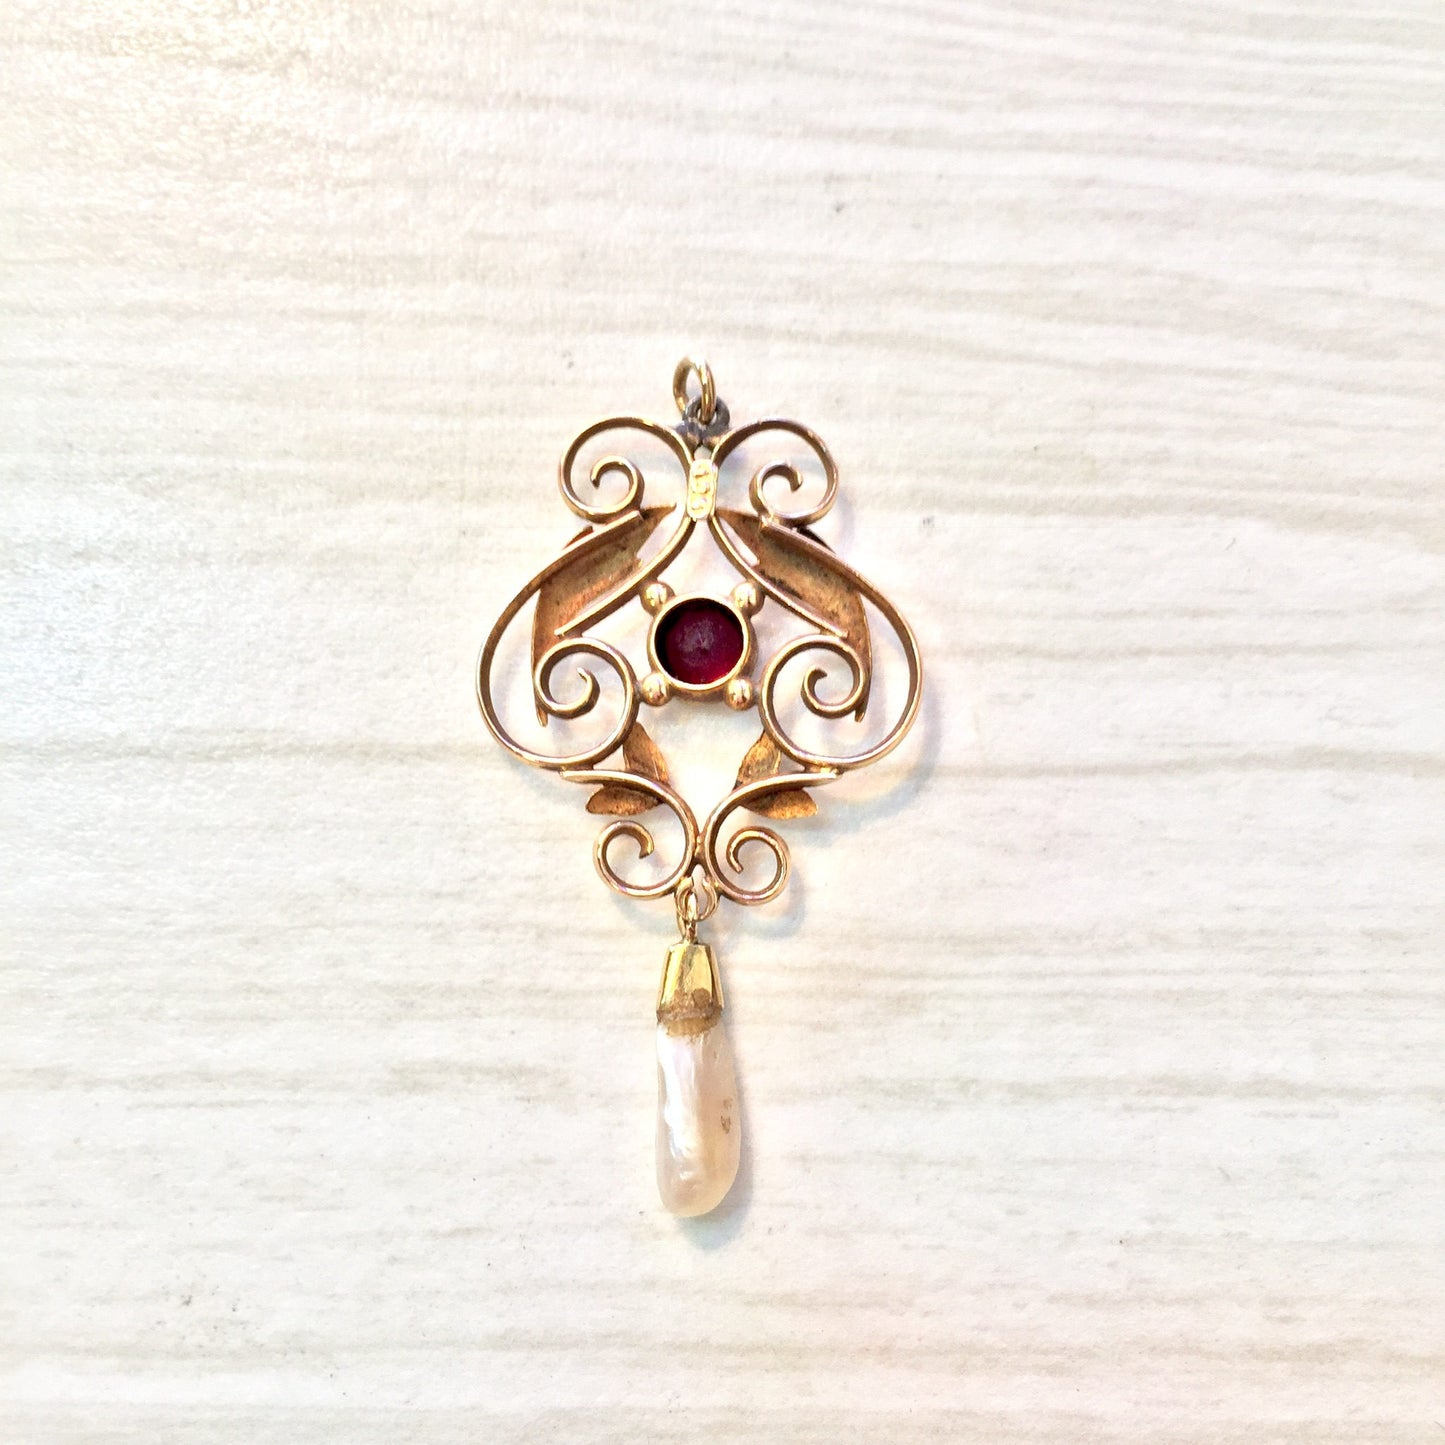 10 karat gold antique pendant featuring an intricate scrolling design accented with a dangling fresh water pearl and a vibrant purple amethyst gemstone against a textured white background.